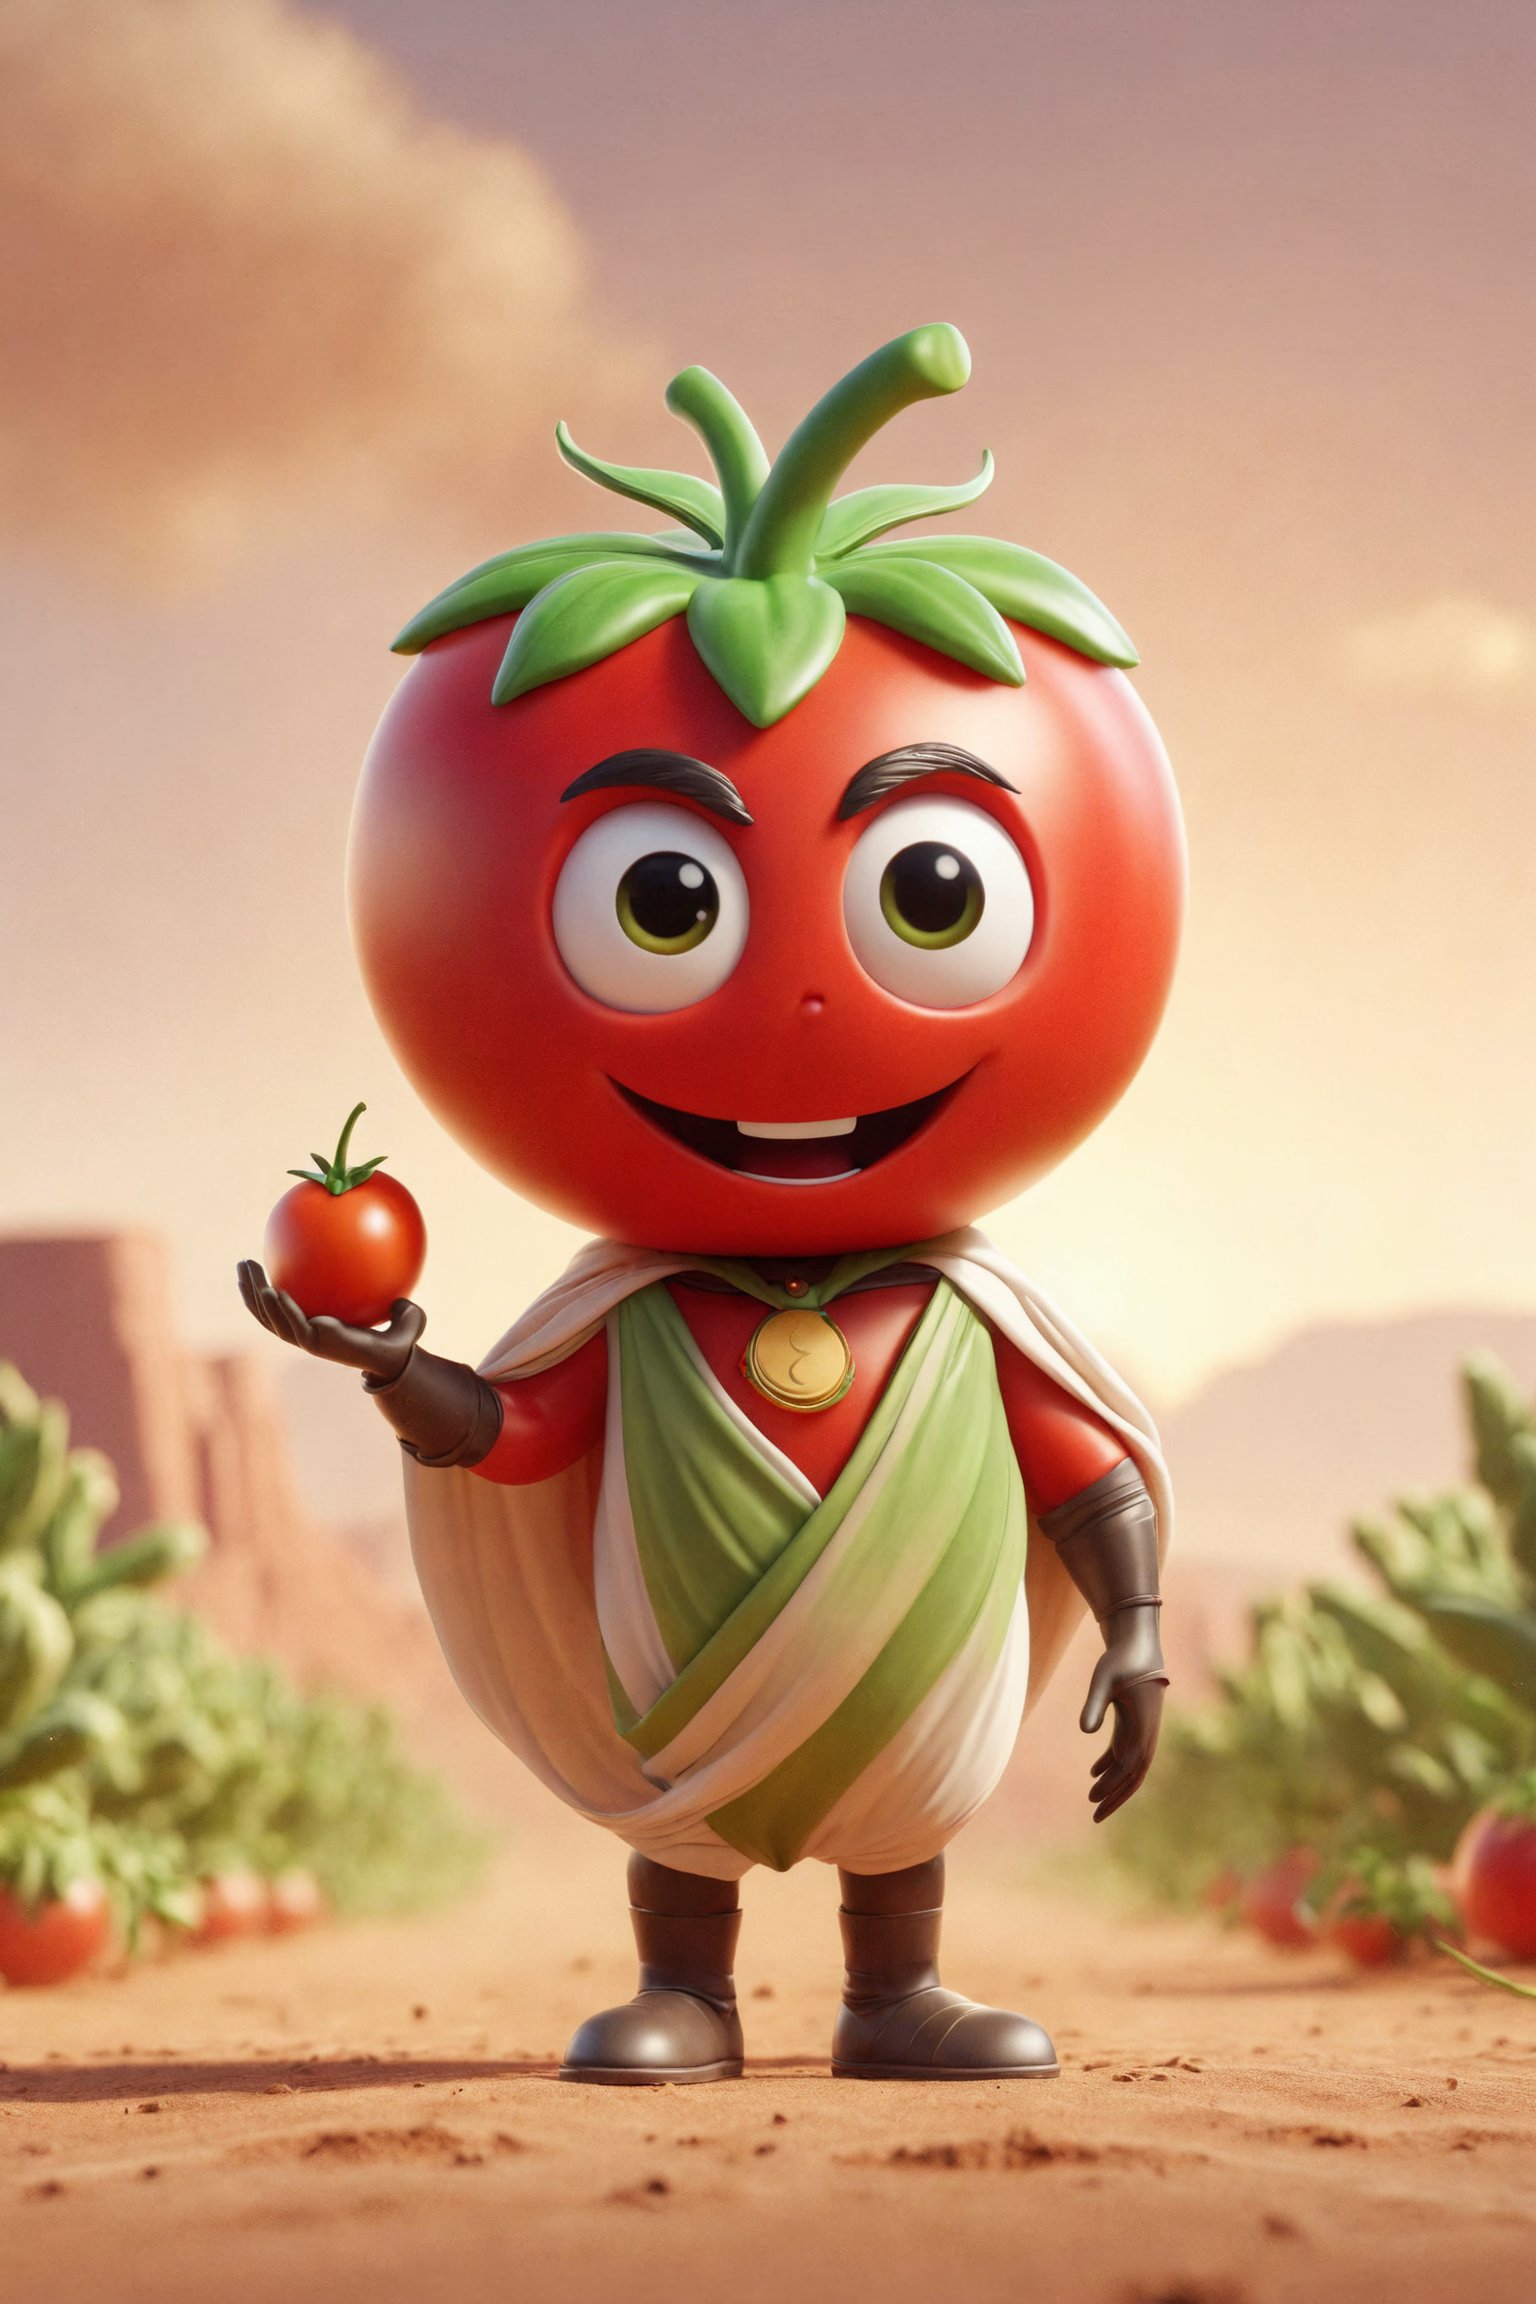 Epic characte cute buy style pixar of god of a tomato, full body mistic composition in a desert